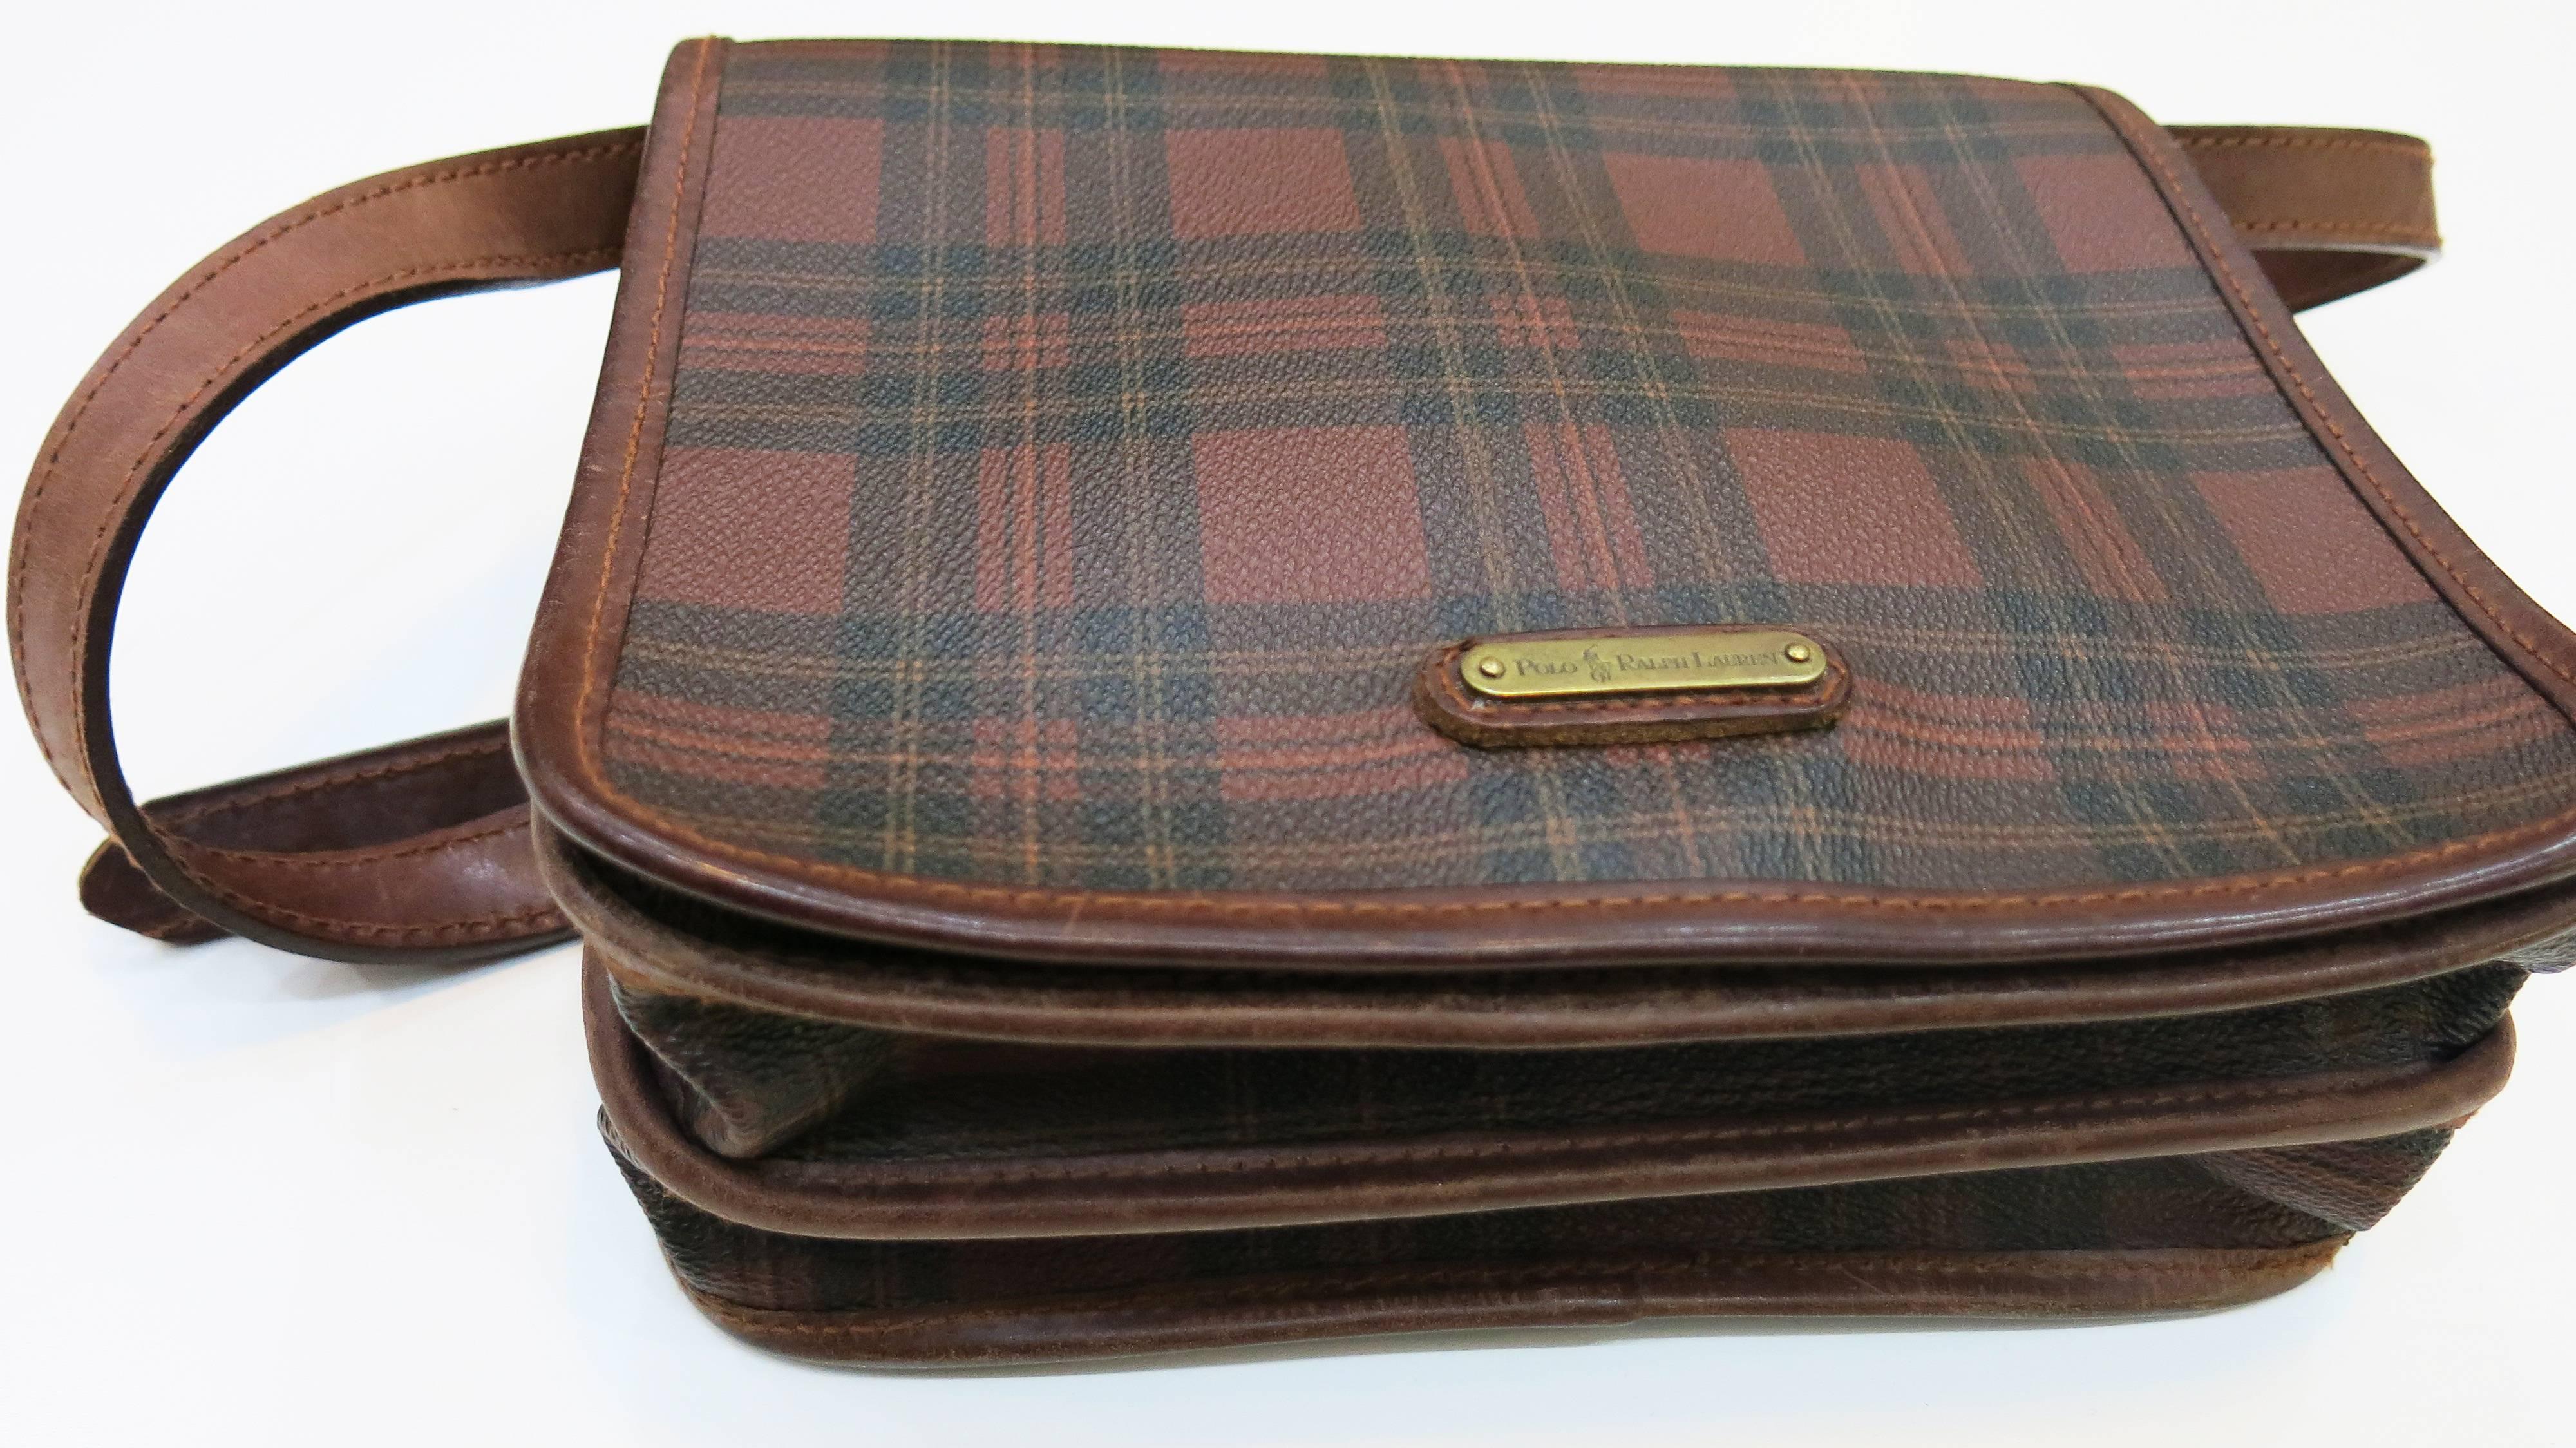 Leather satchel-style plaid shoulder bag with adjustable leather strap and canvas lining. Two open inner pockets one zip pocket. The perfect size for carrying everything you need without over-stuffing.

Leather has average wear for the bag's